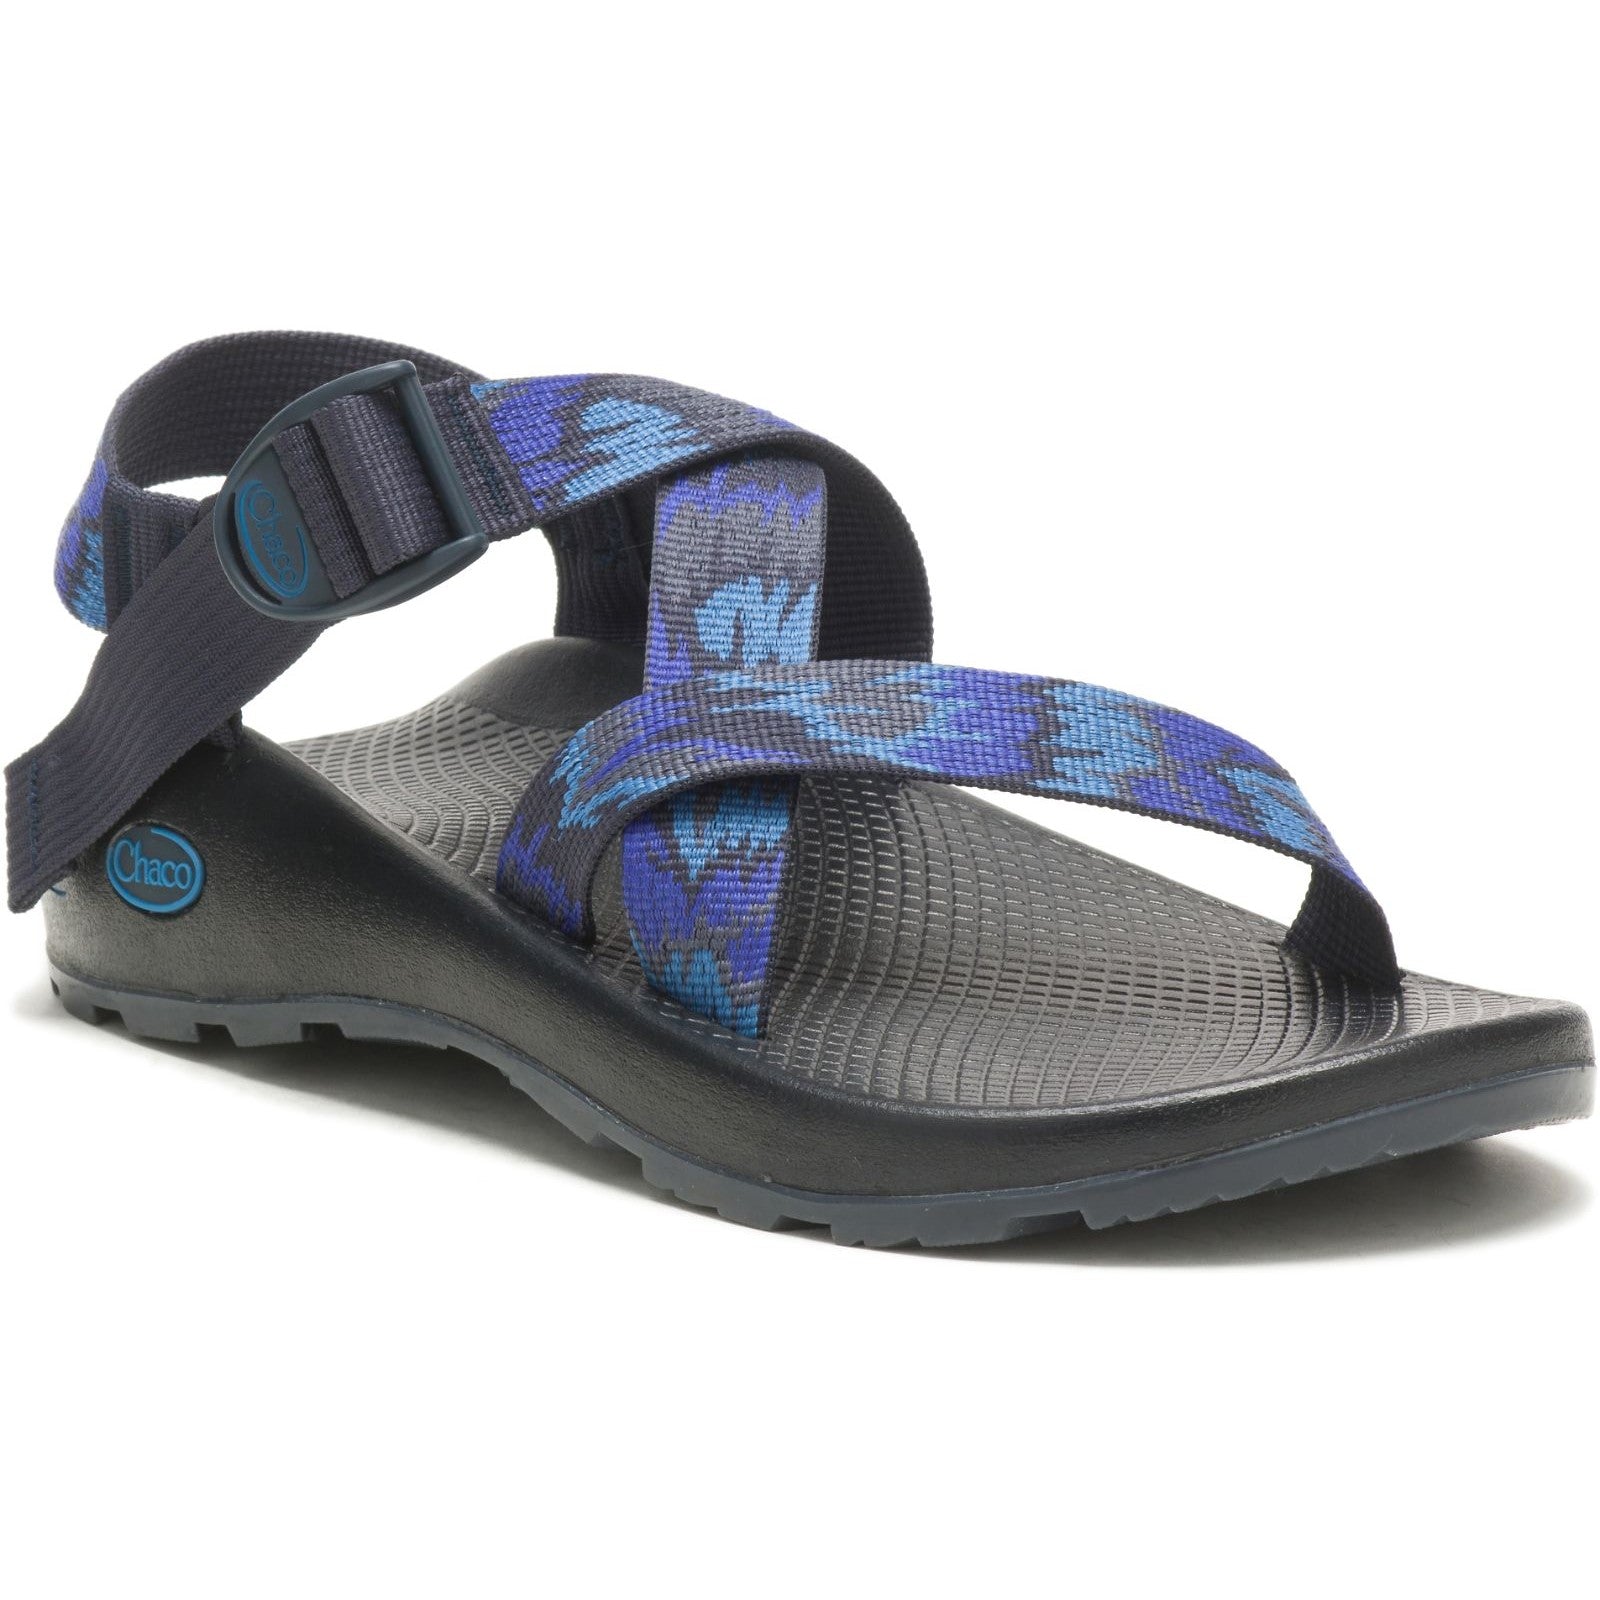 Buy Rick Rock Sandals For Men ( Black ) Online at Low Prices in India -  Paytmmall.com